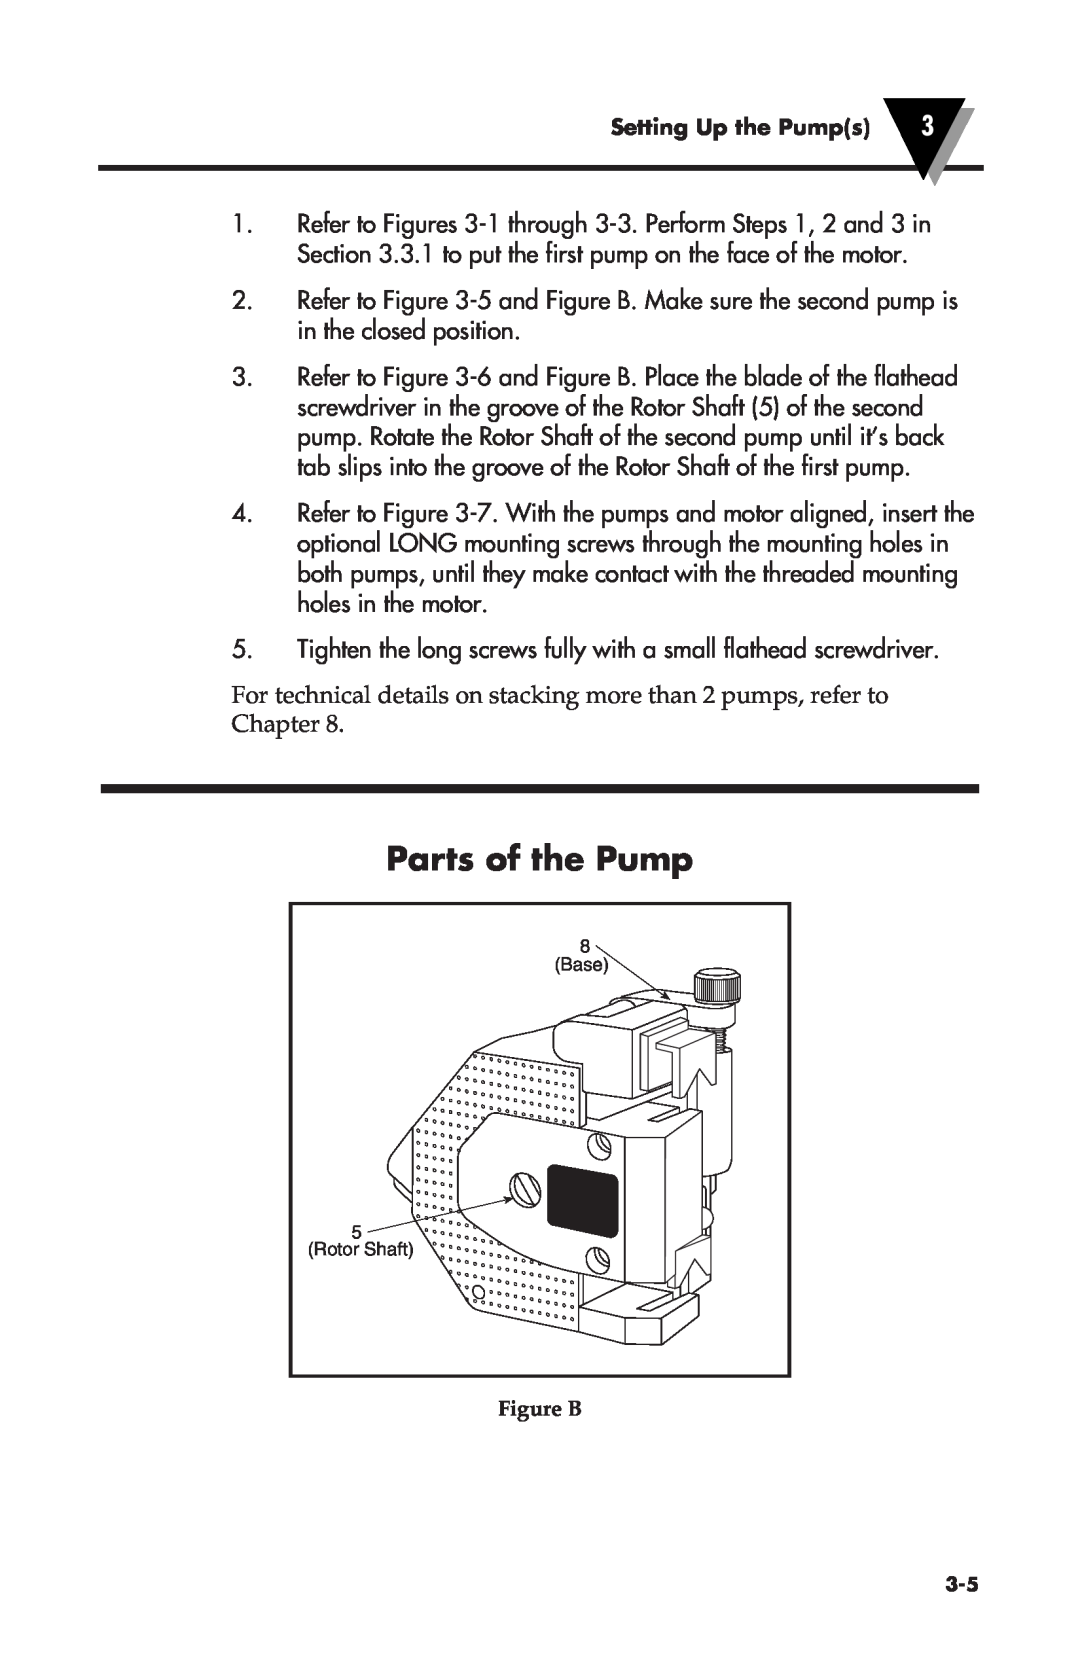 Omega Vehicle Security FPU500 manual Parts of the Pump, Figure B 